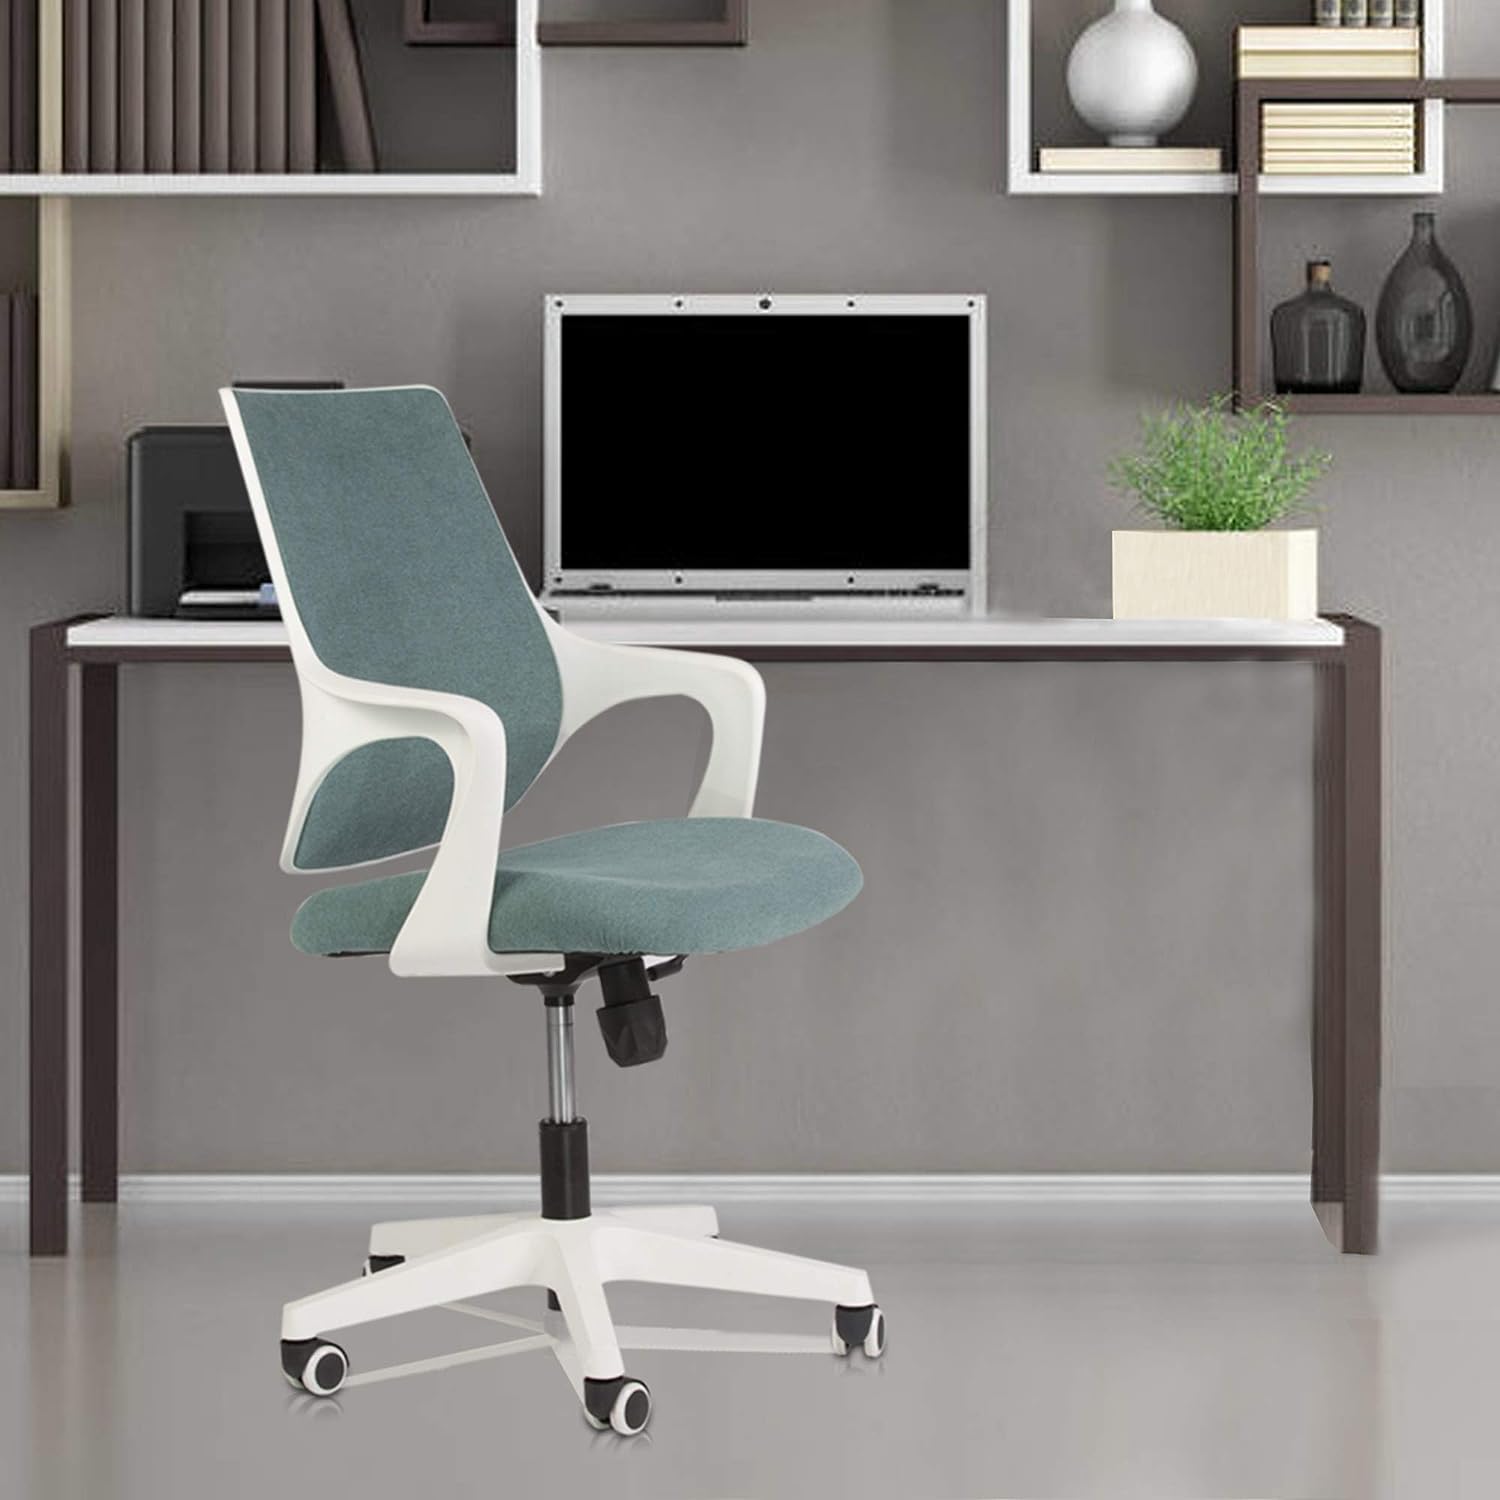 Height Adjustable Swivel Ergonomic Office Desk Chair with Cuddle Back and Padded Seat